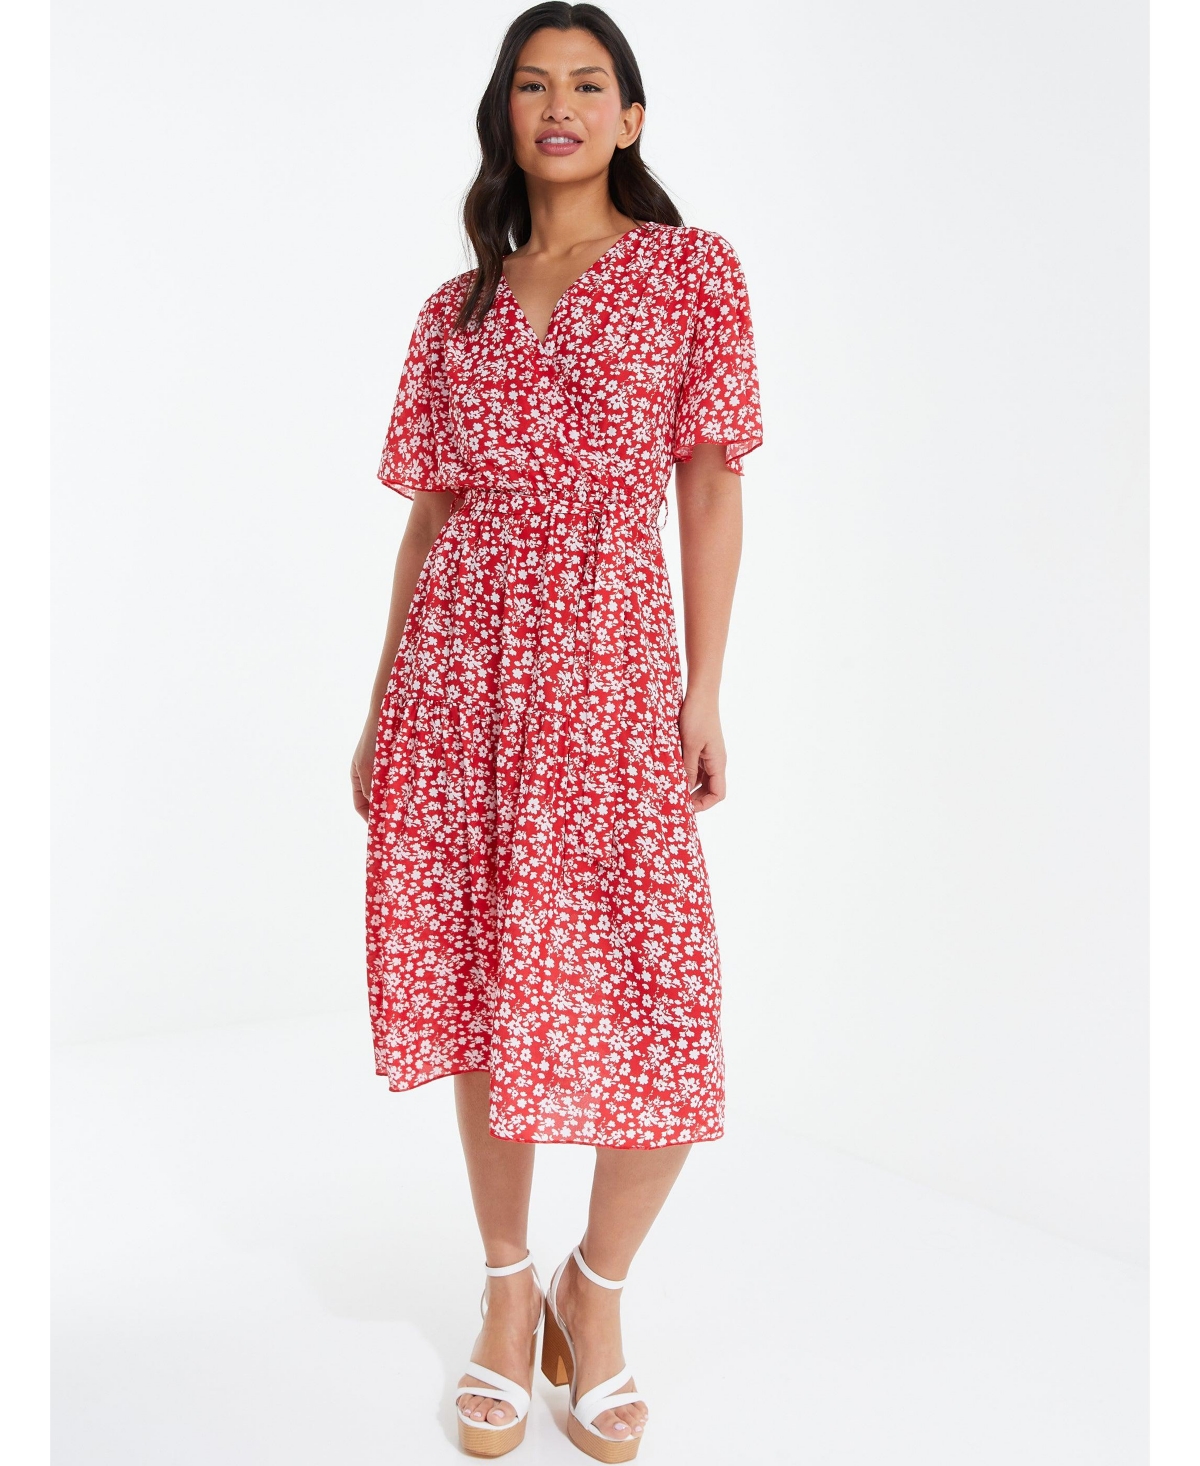 Women's Ditsy Print Tiered Midi Dress - Red printed floral